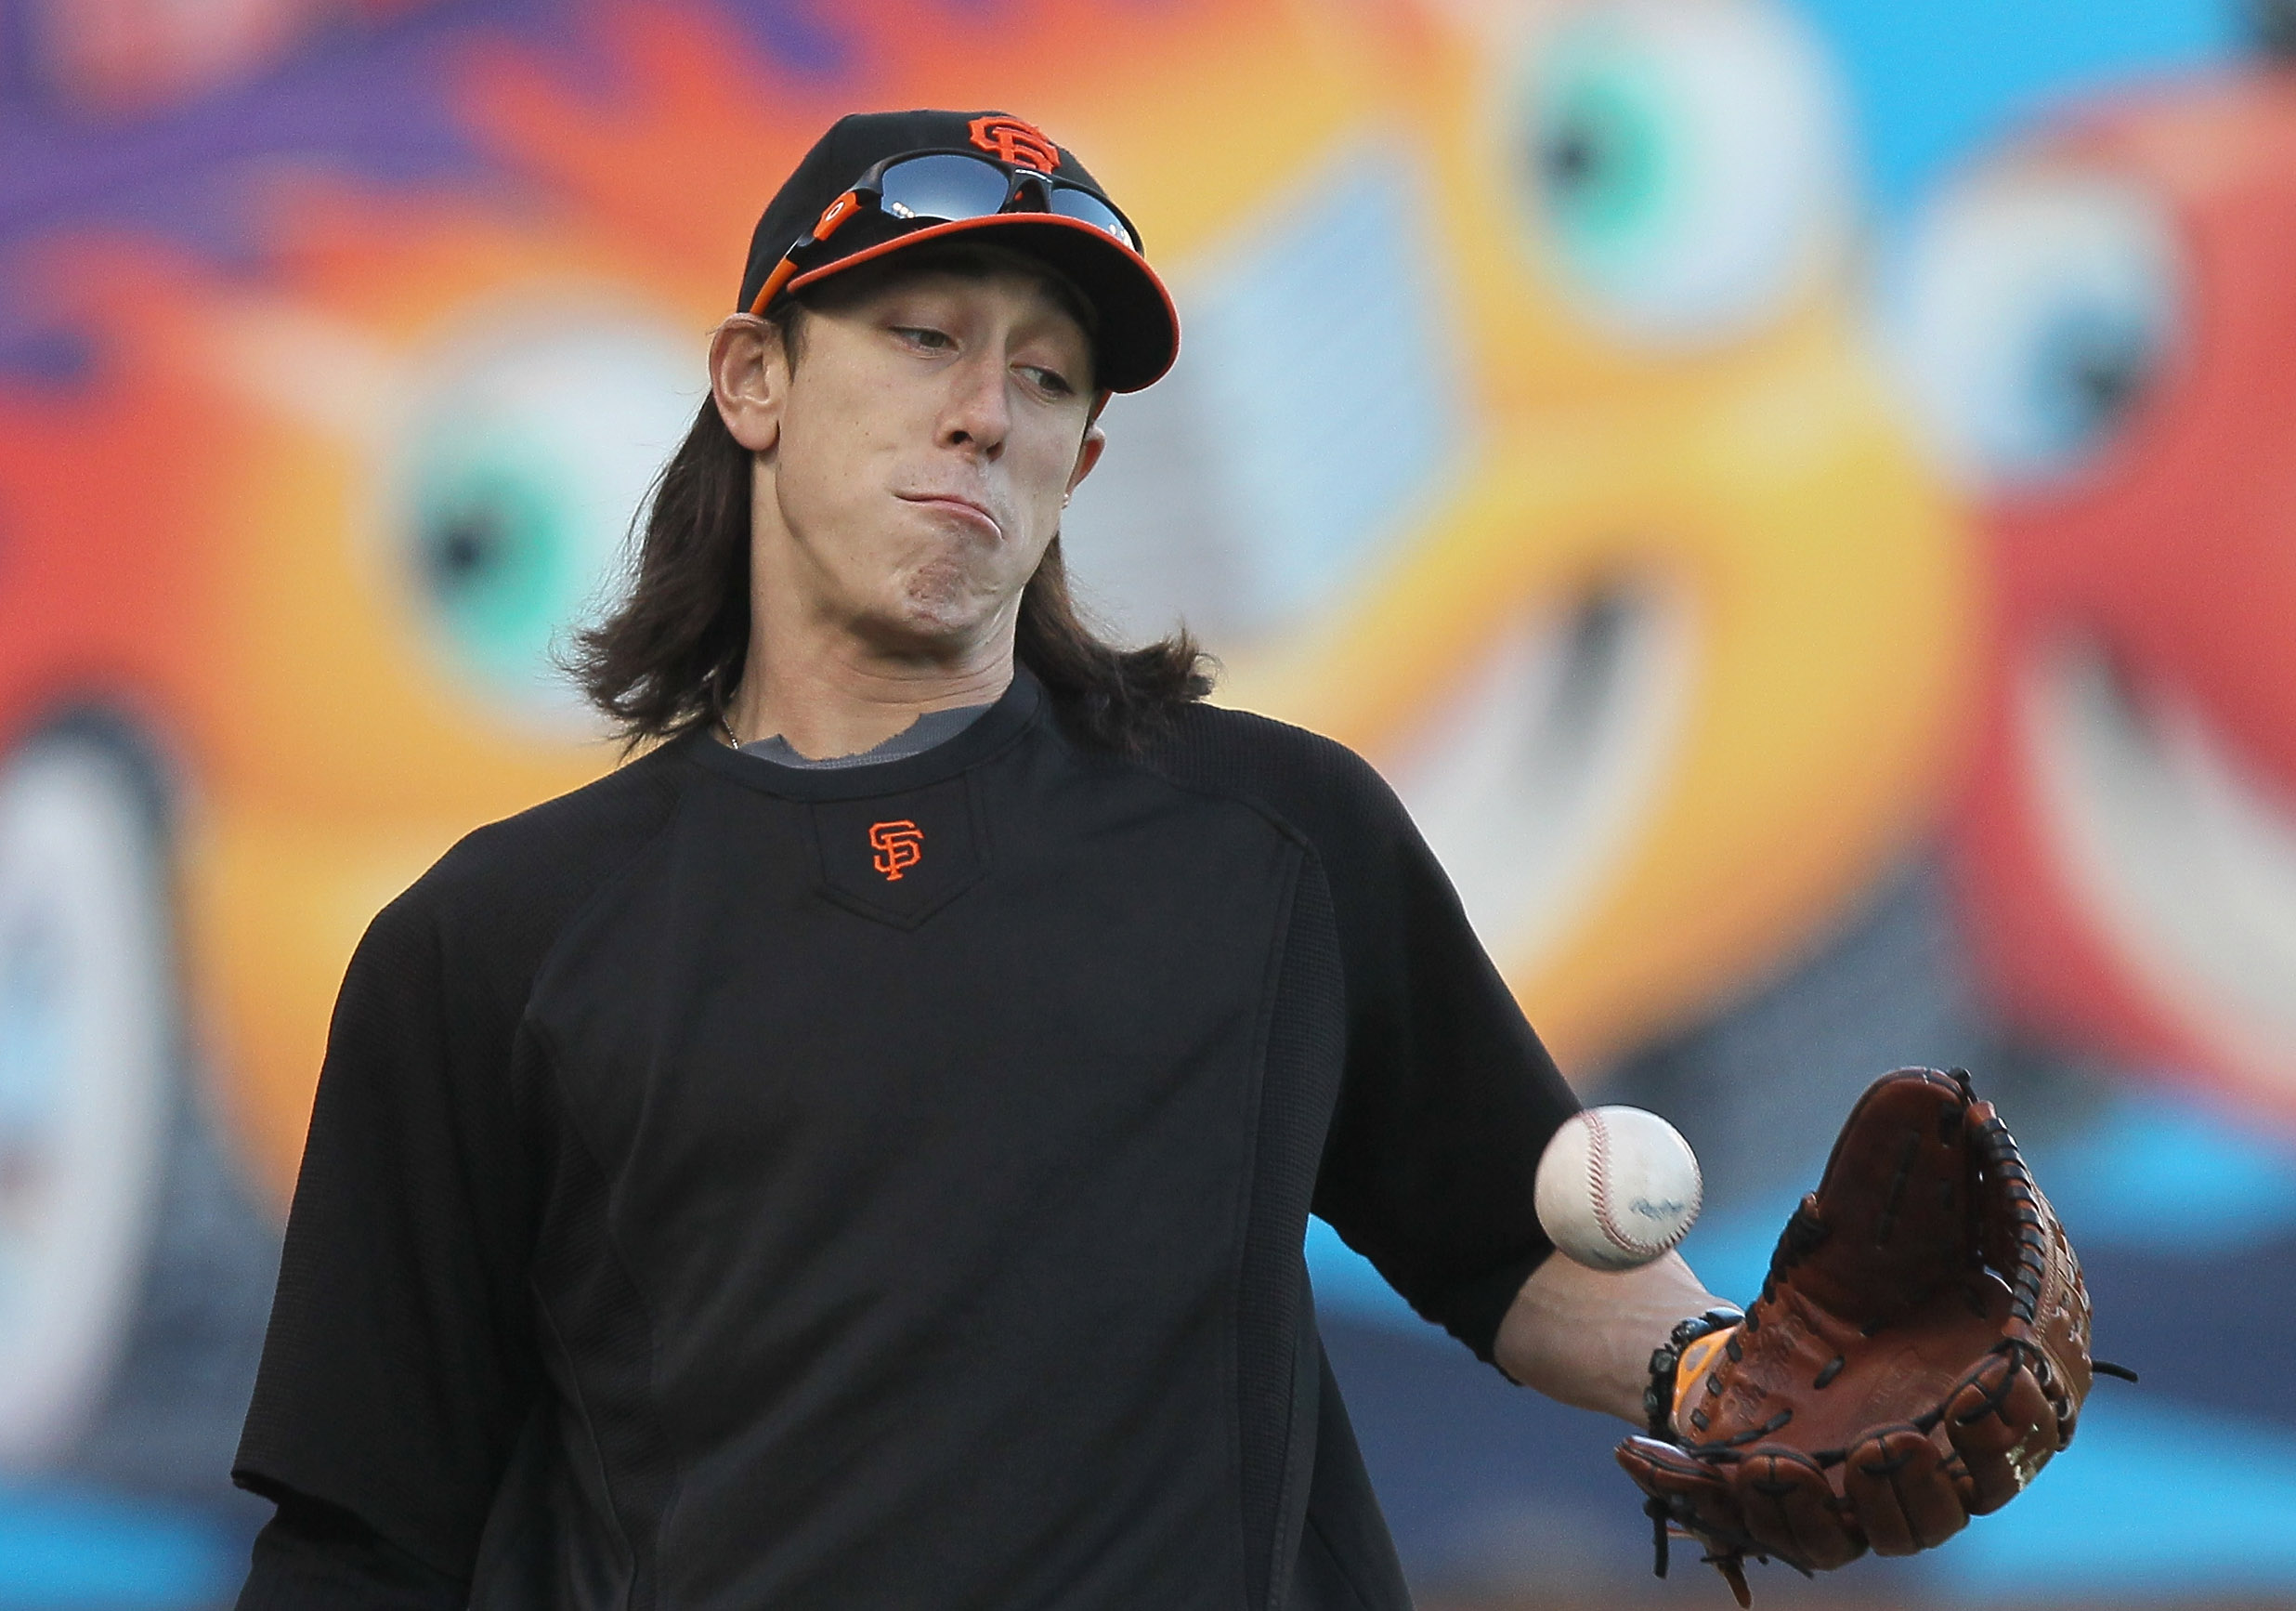 SAN FRANCISCO - OCTOBER 25:  Tim Lincecum #55 of the San Francisco Giants plays catch during a team workout at AT&T Park on October 25, 2010 in San Francisco, California. The Giants are preparing to face the Texas Rangers in the 2010 World Series.  (Photo